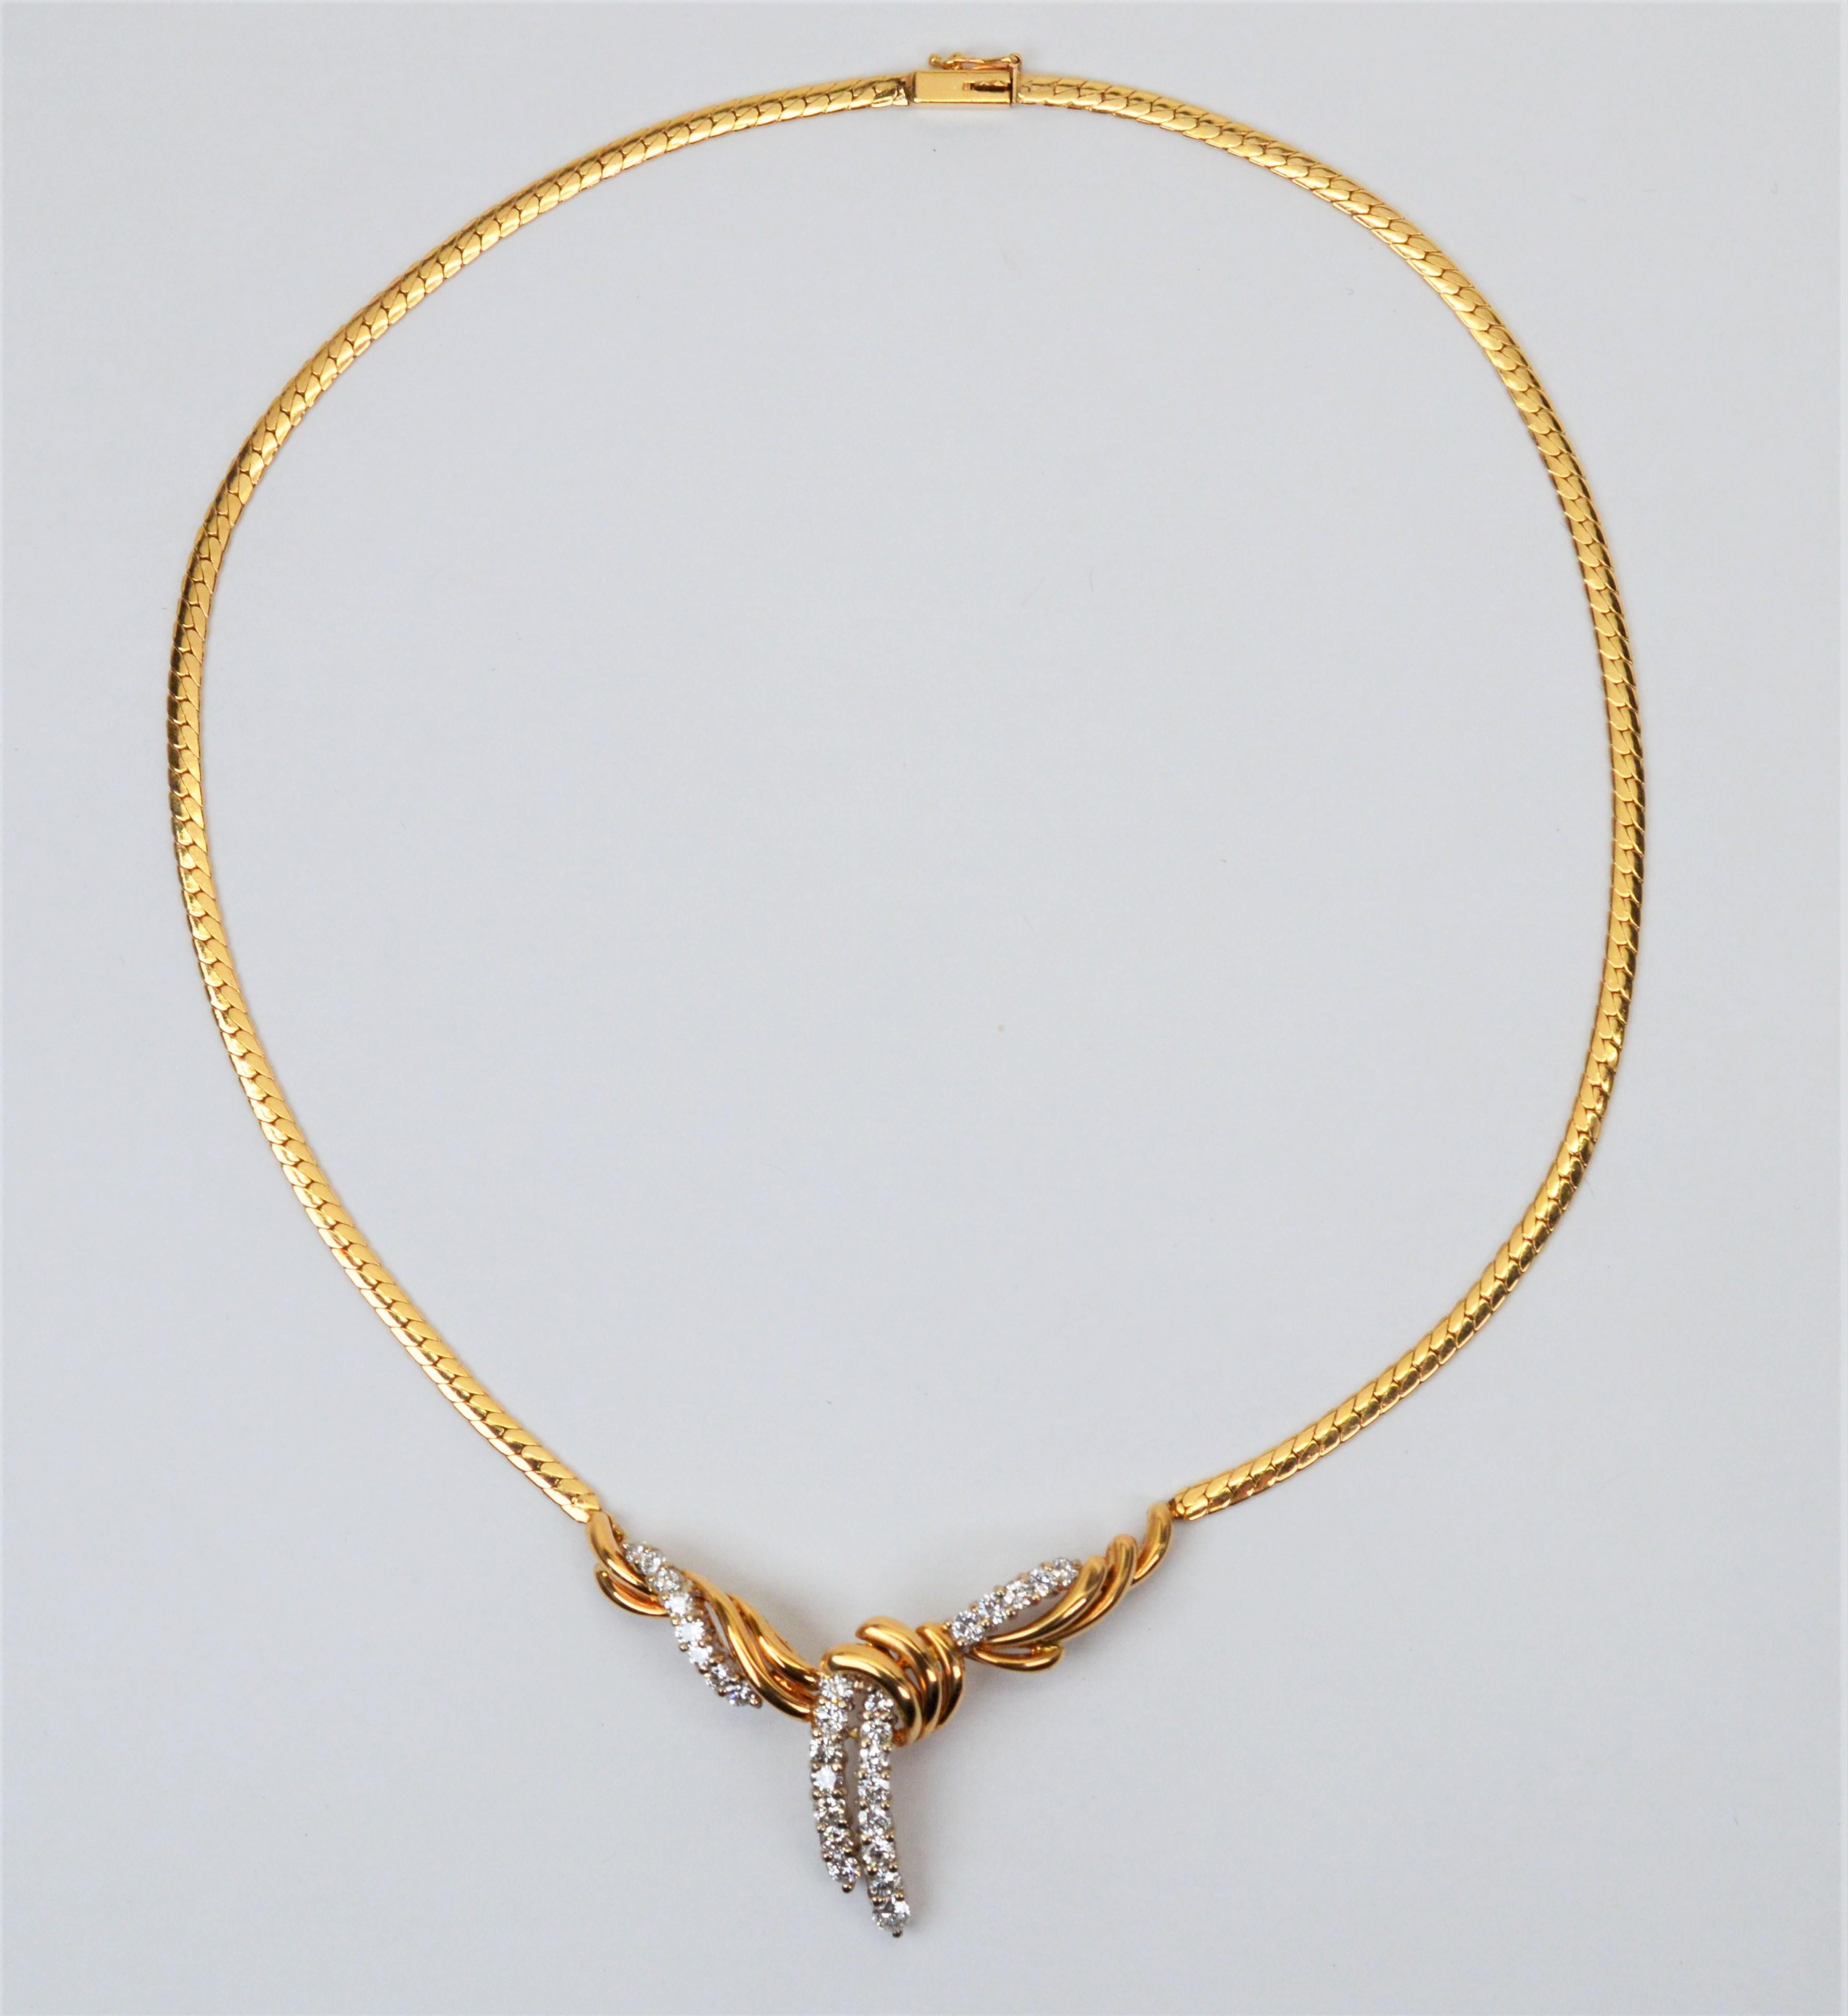 A sumptuous choice for that special occasion. This sophisticated lariat inspired pendant necklace features an integrated sweeping knot of 14K yellow gold adorned with twenty eight .05 faceted round H/VS diamonds, 1.4 carats total weight. The overall